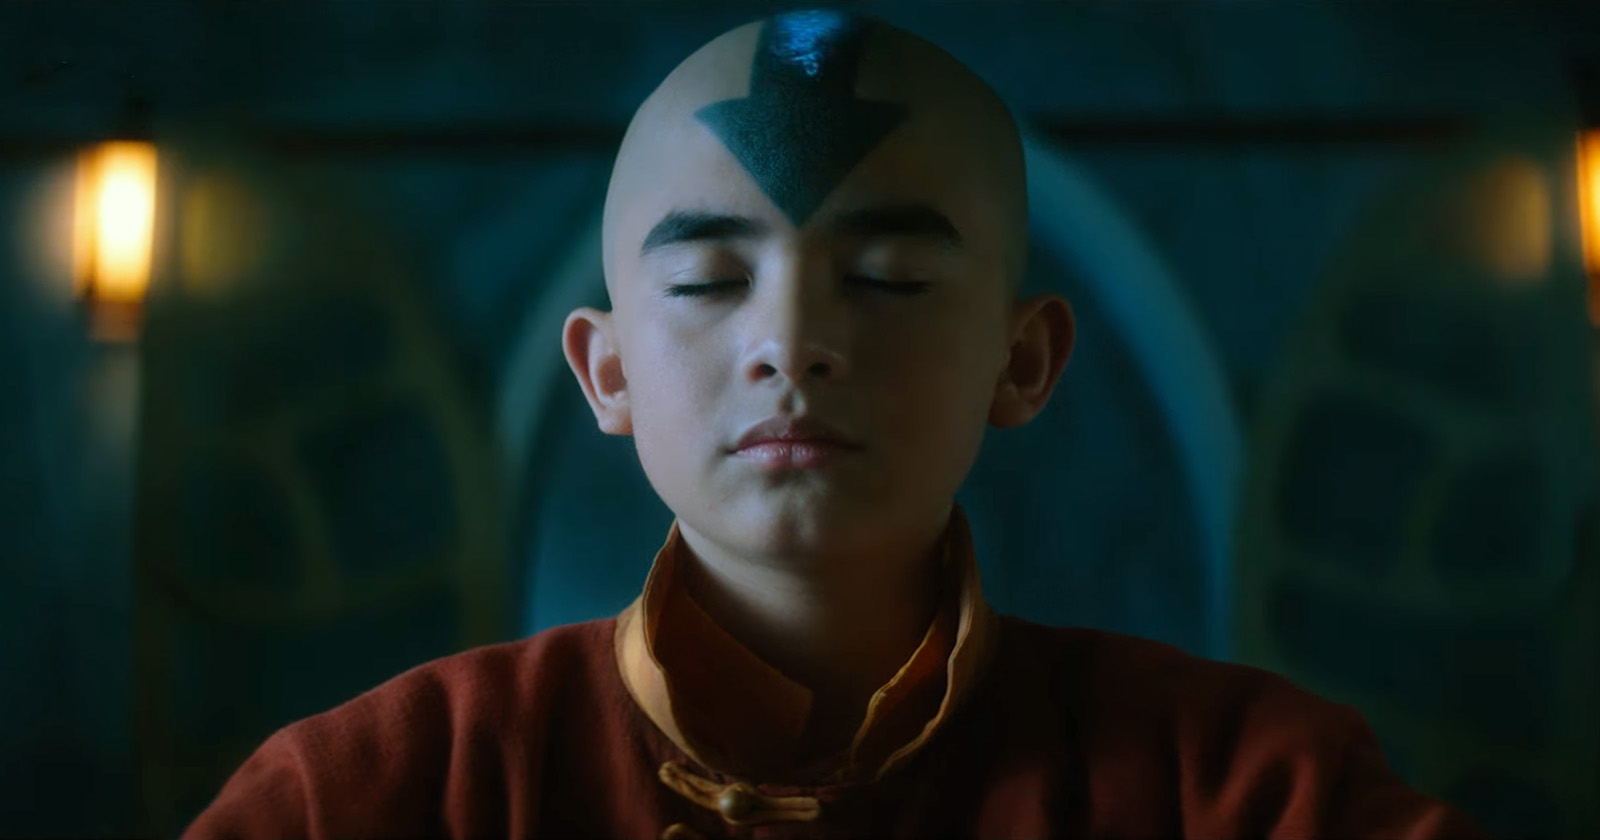 Avatar series released on Netflix! How are the review scores?